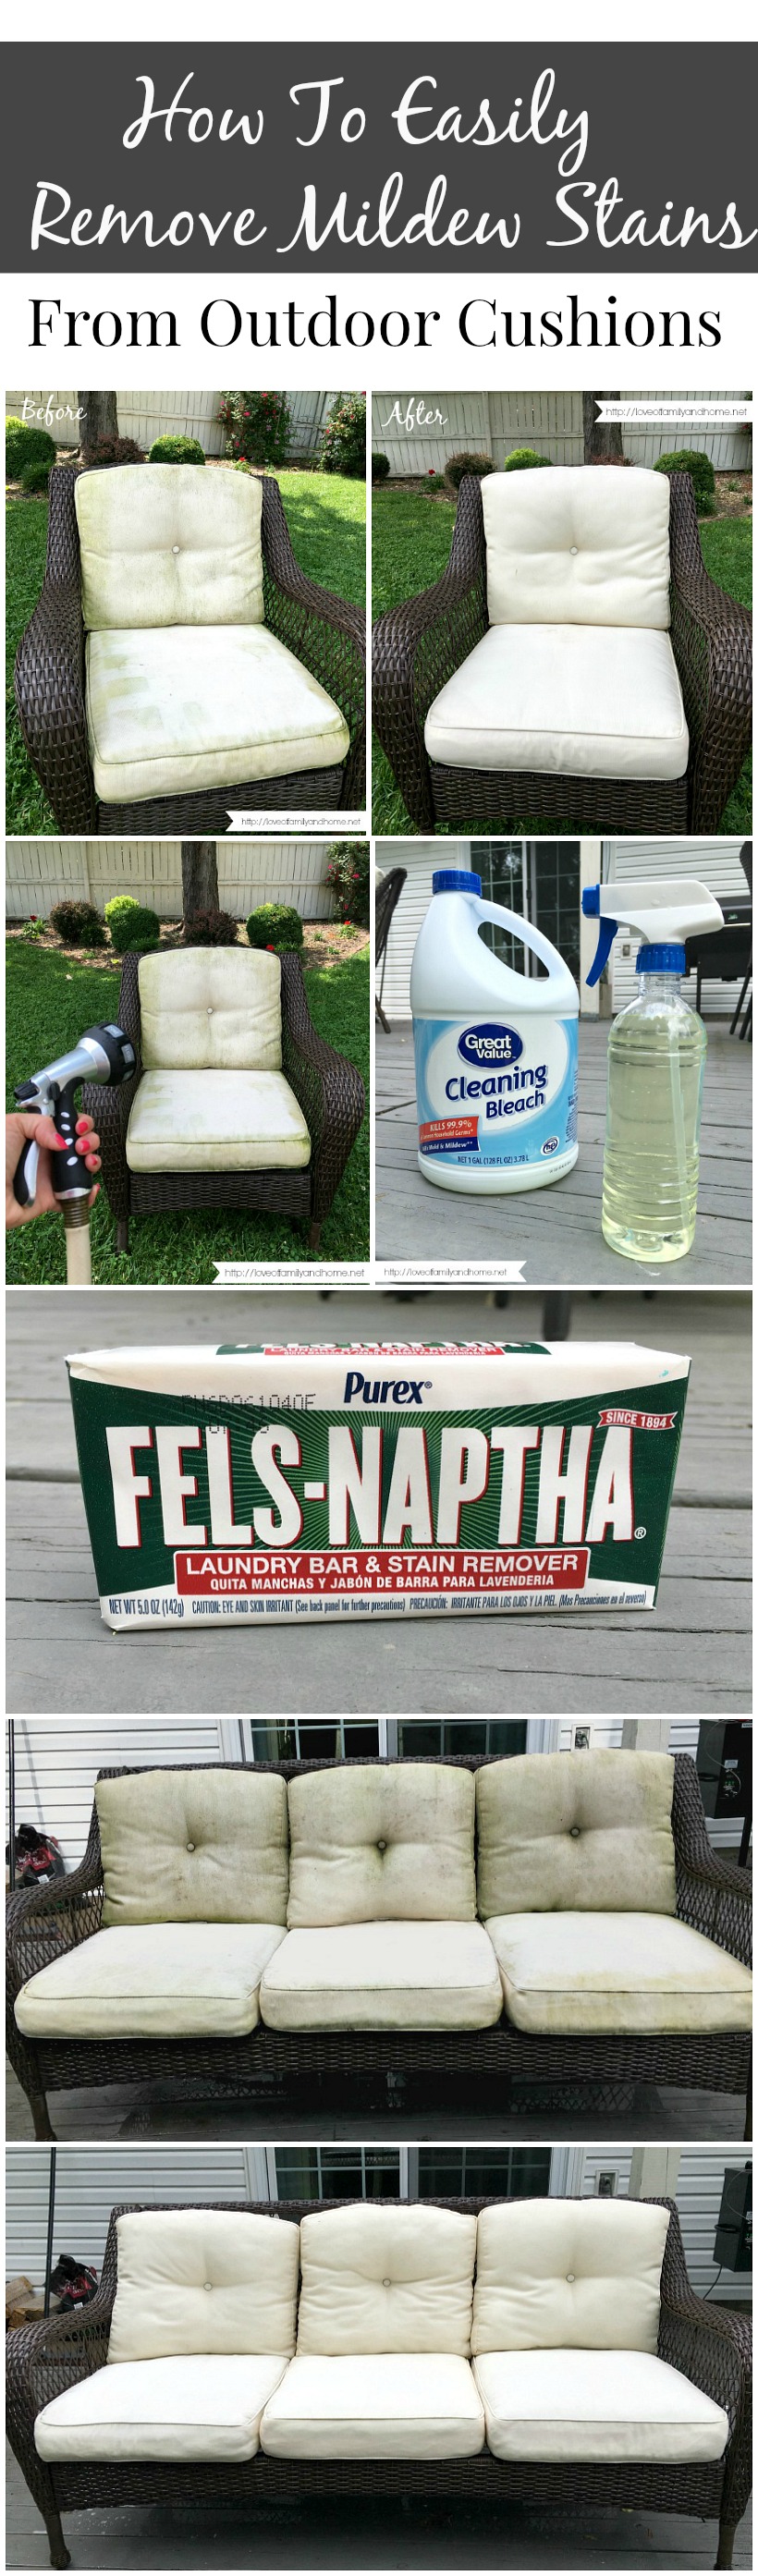 Remove Mildew Stains From Outdoor Cushions, How To Get Mould Out Of Garden Furniture Cushions